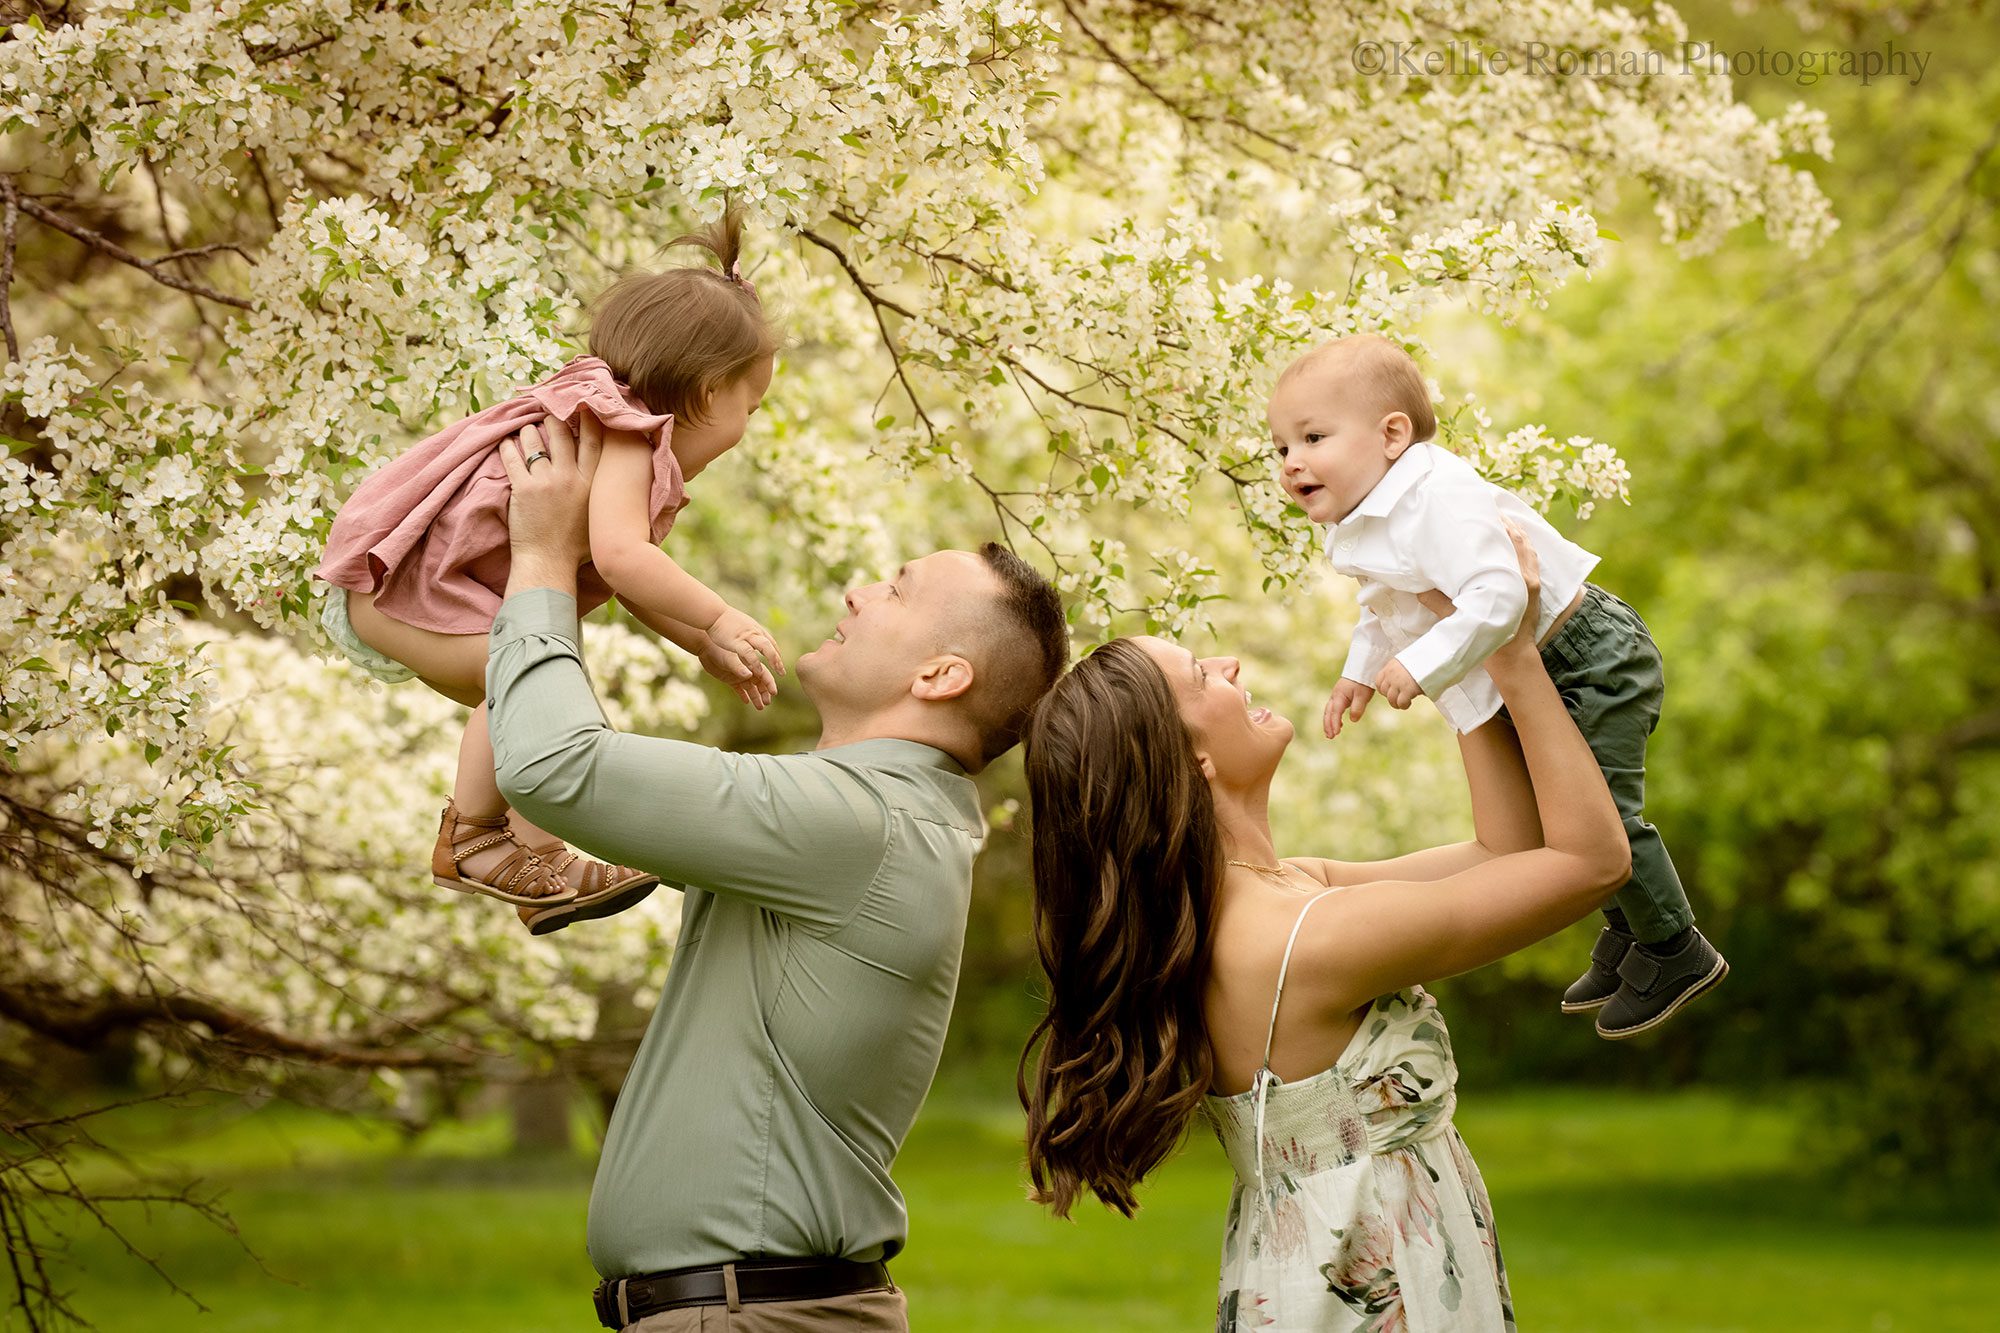 spring in milwaukee. a husband and wife are standing back to back in greendale park. mom is holding toddler son in the air, and dad is holding toddler daughter in the air. they are looking at their children and smiling. trees are full of flowers behind them
